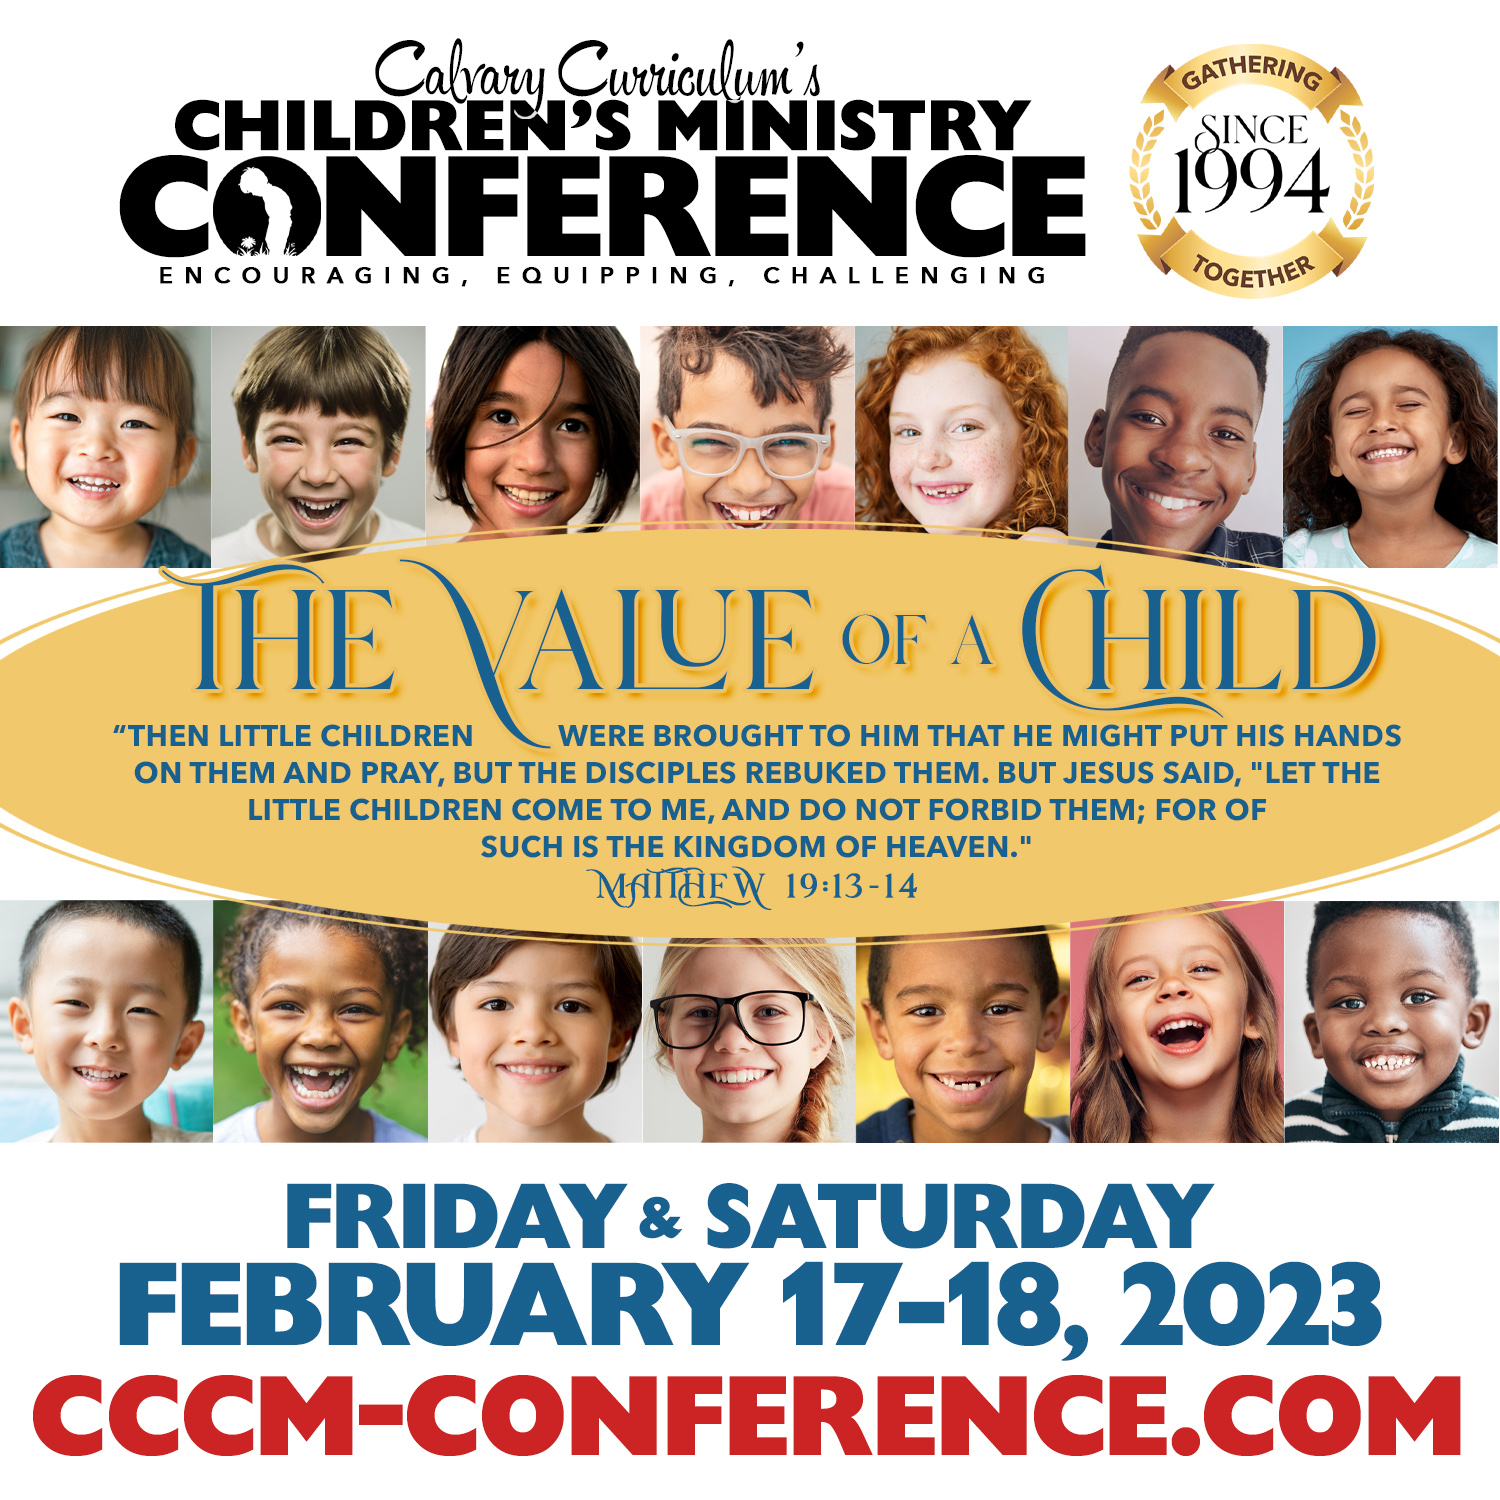 CC's Children's Ministry Conferences Encouraging, Equipping, Challenging